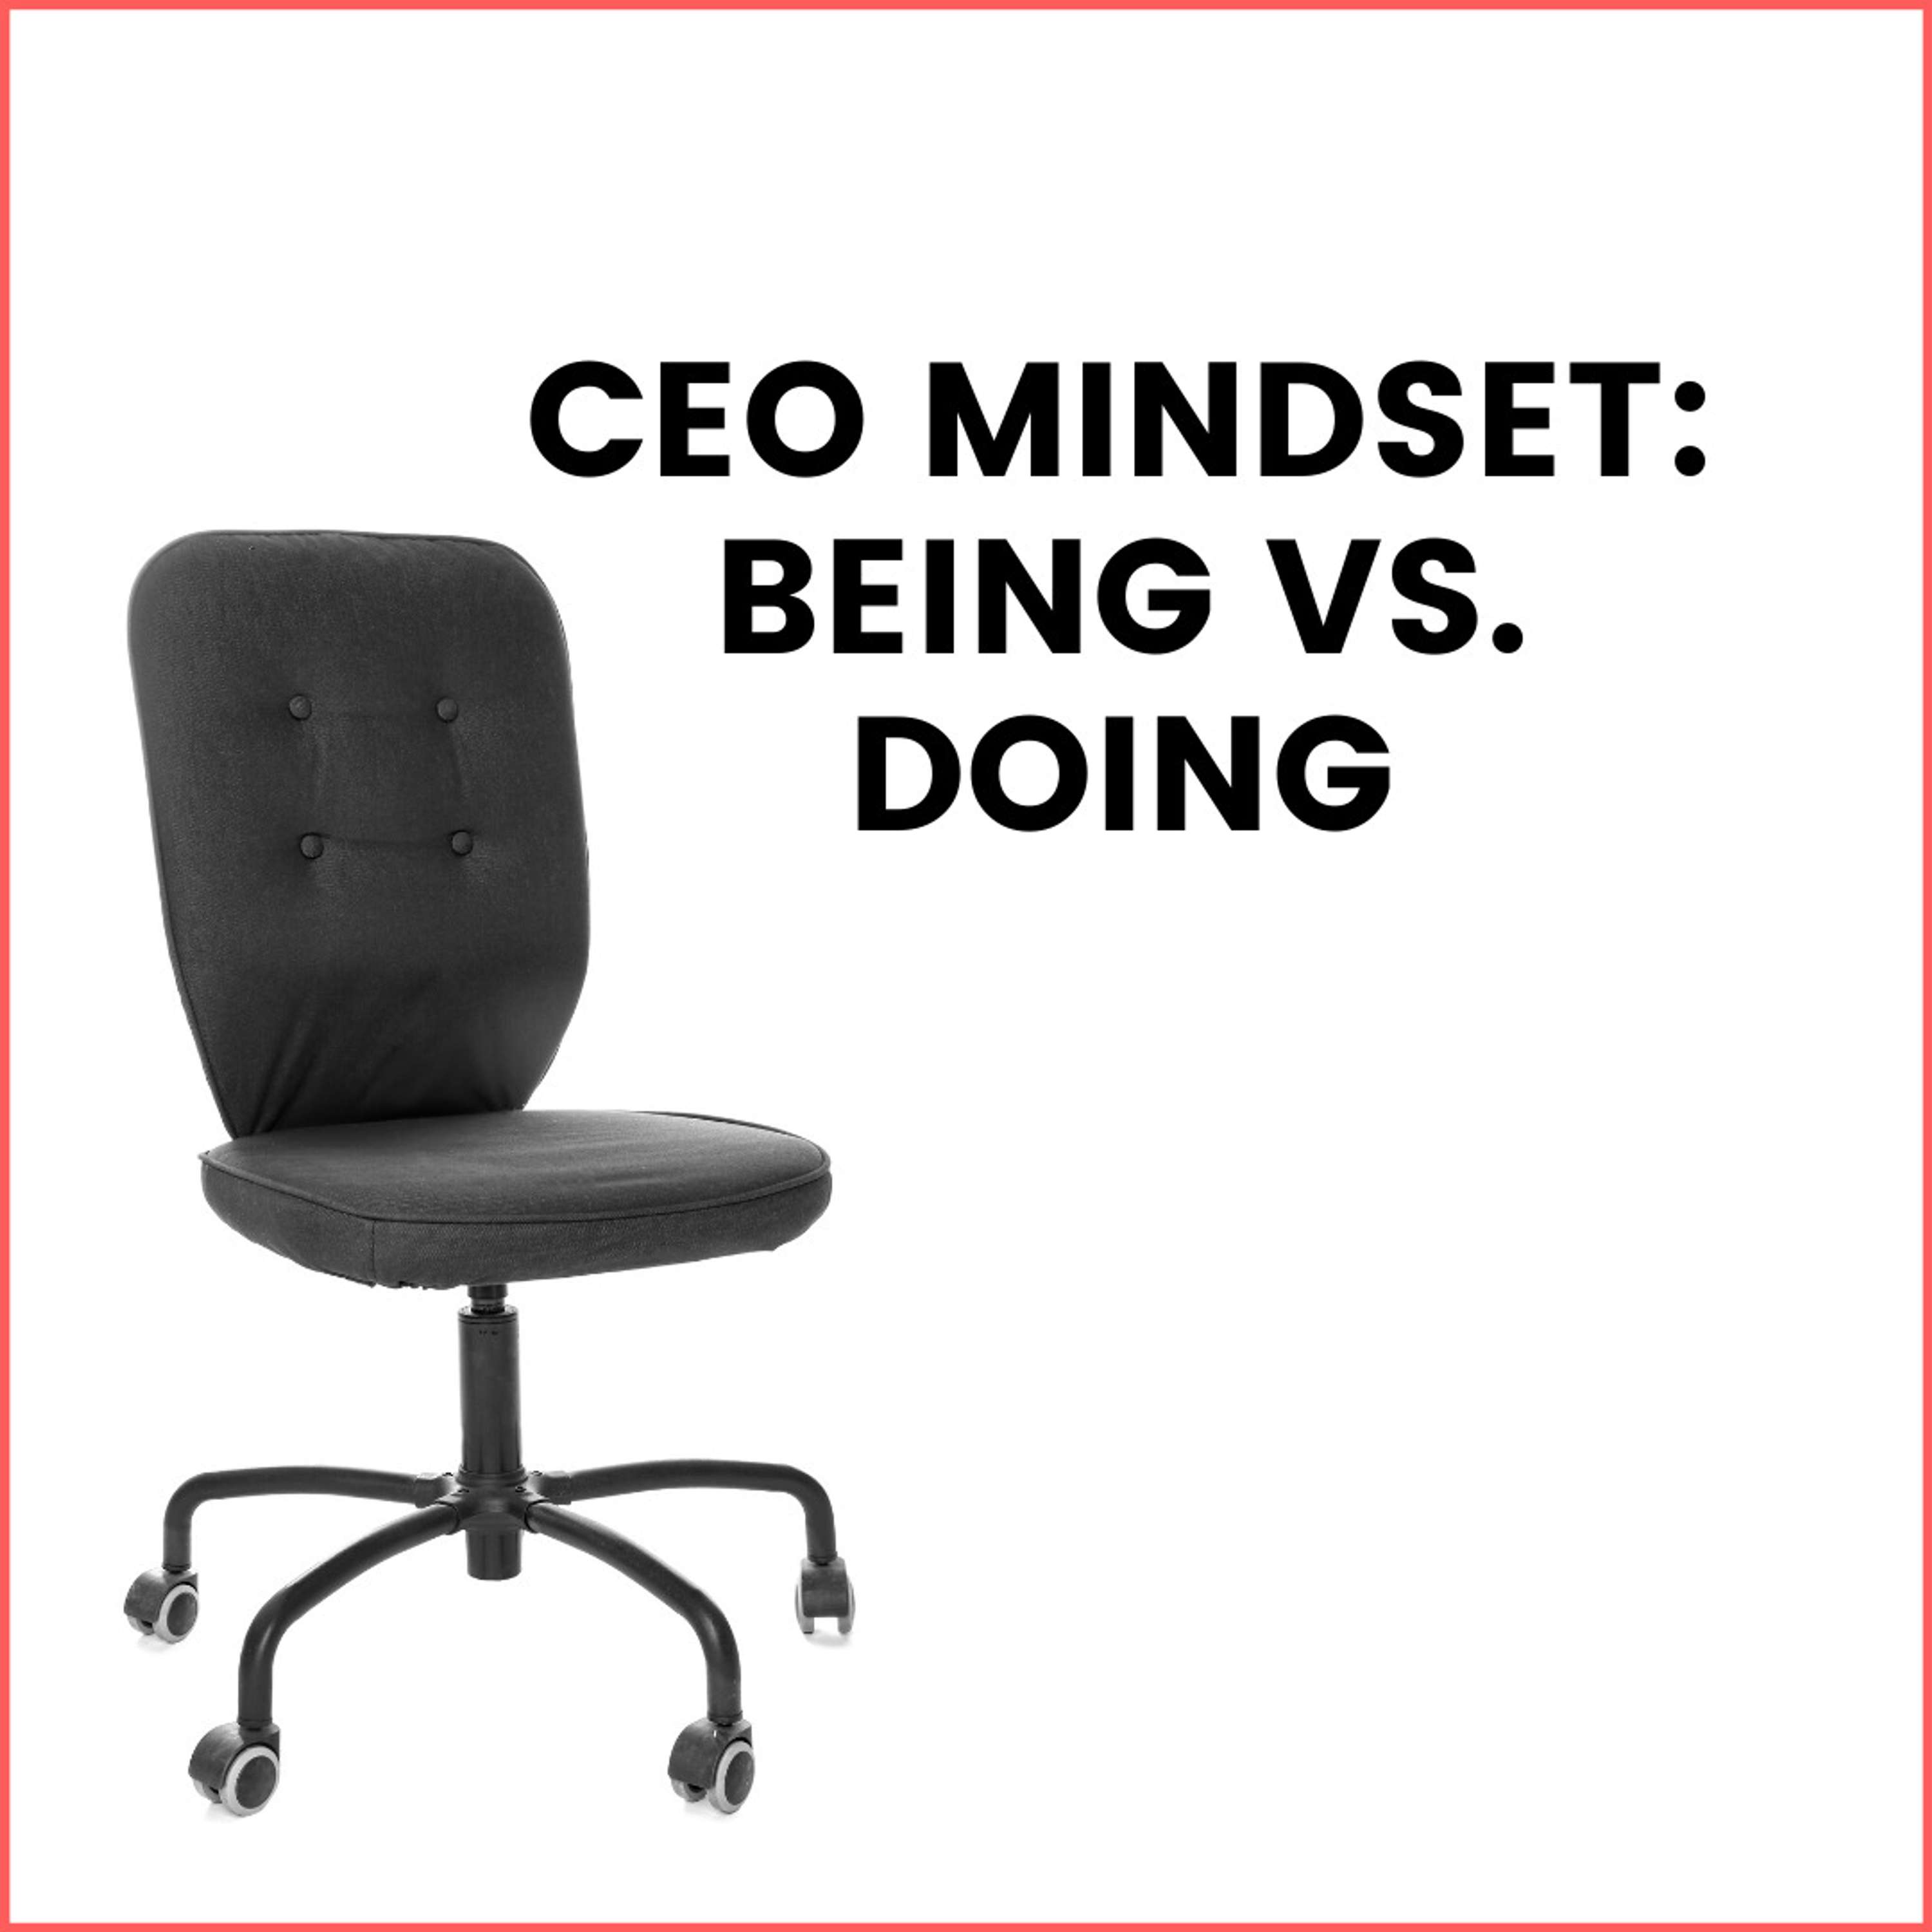 33. Developing a CEO Mindset (Being vs. Doing)